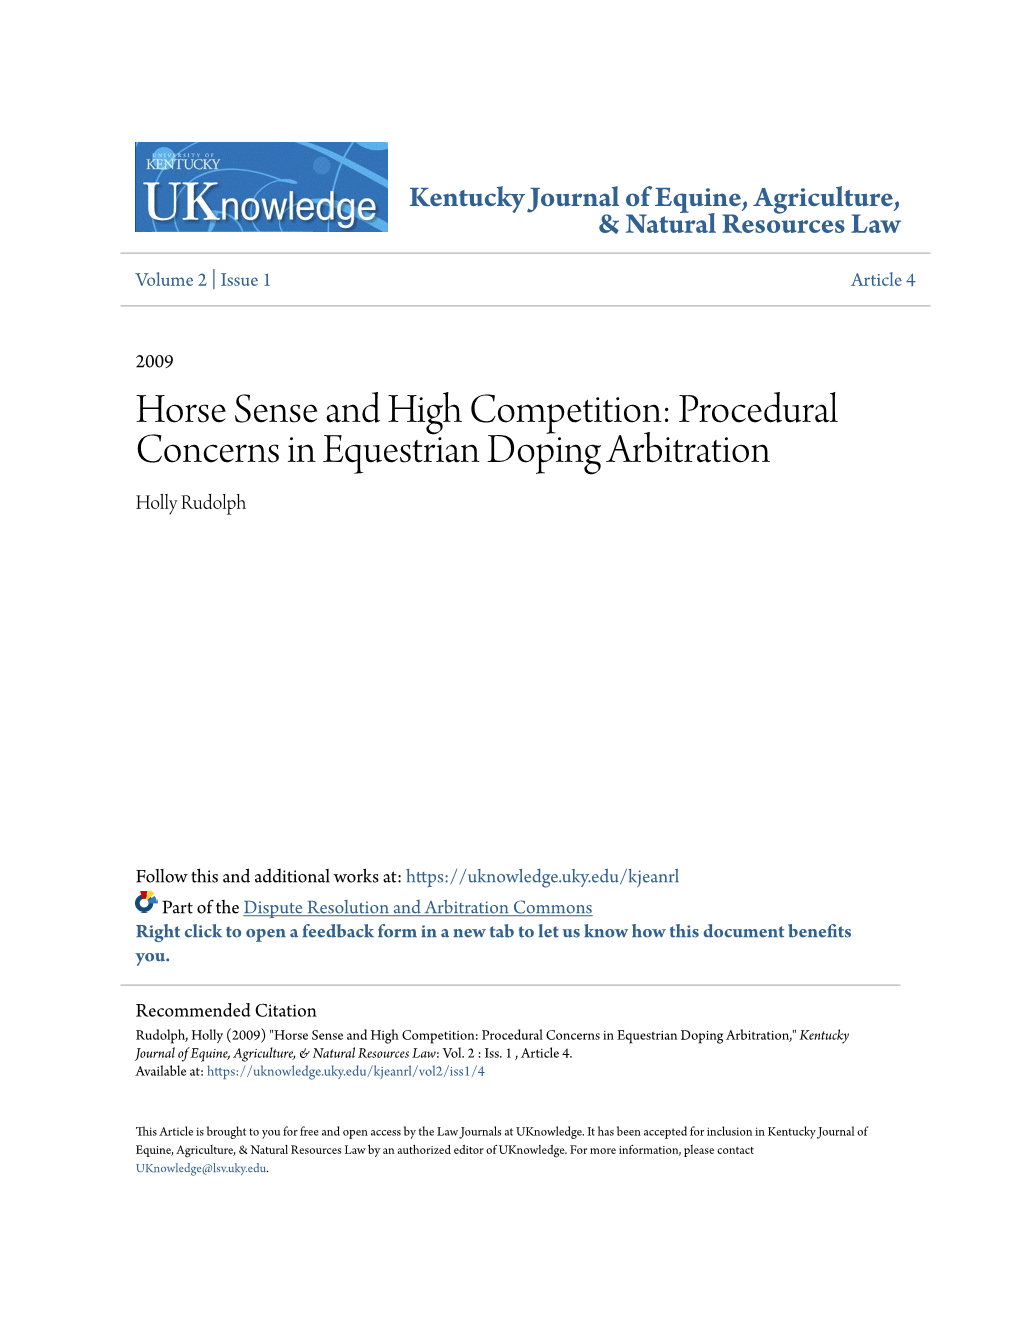 Horse Sense and High Competition: Procedural Concerns in Equestrian Doping Arbitration Holly Rudolph